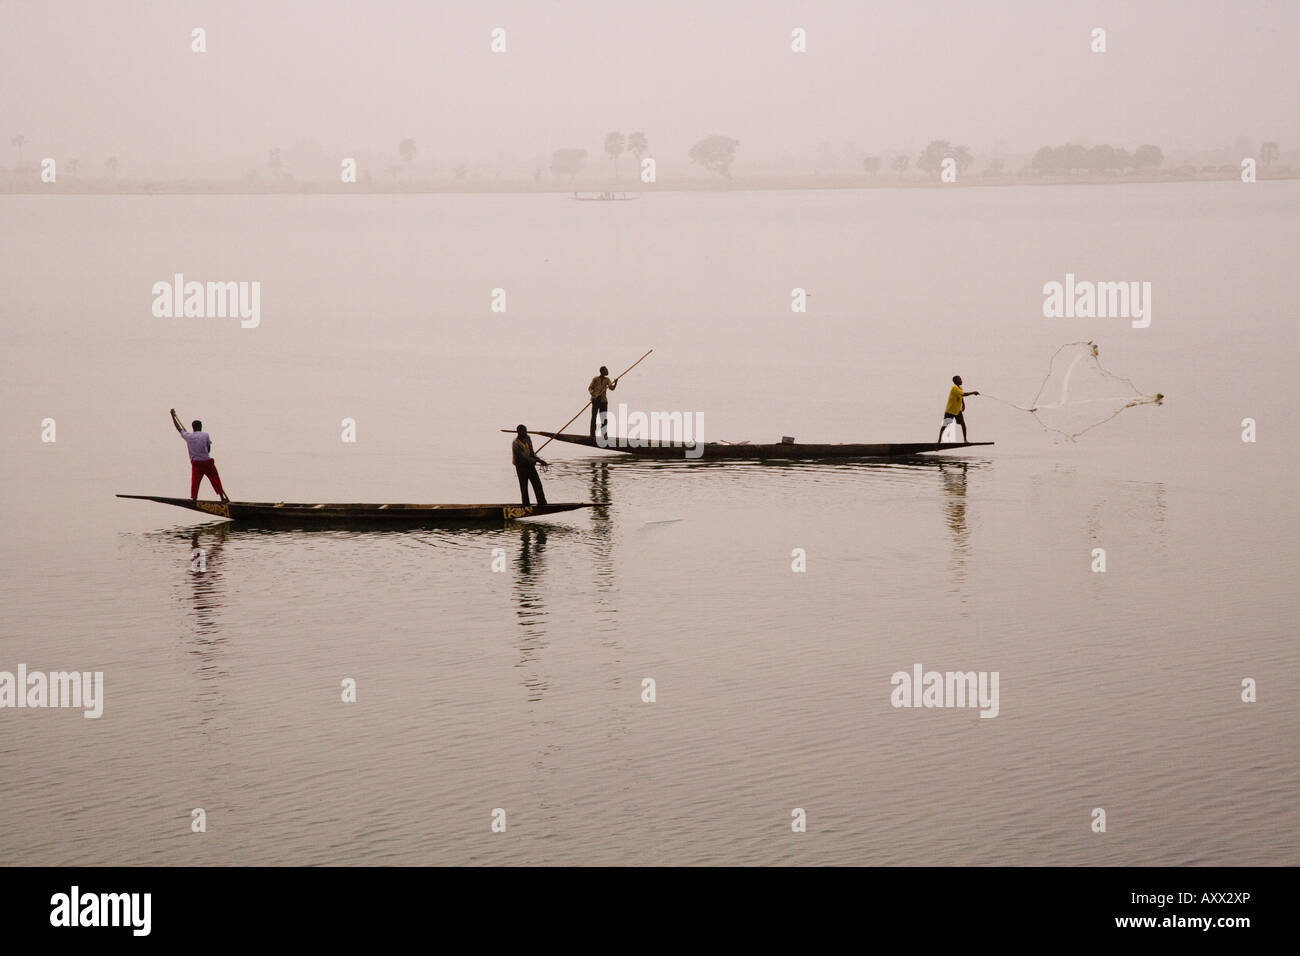 Fishing on the river Niger, Niger Inland Delta, Segou region, Mali, West Africa, Africa Stock Photo